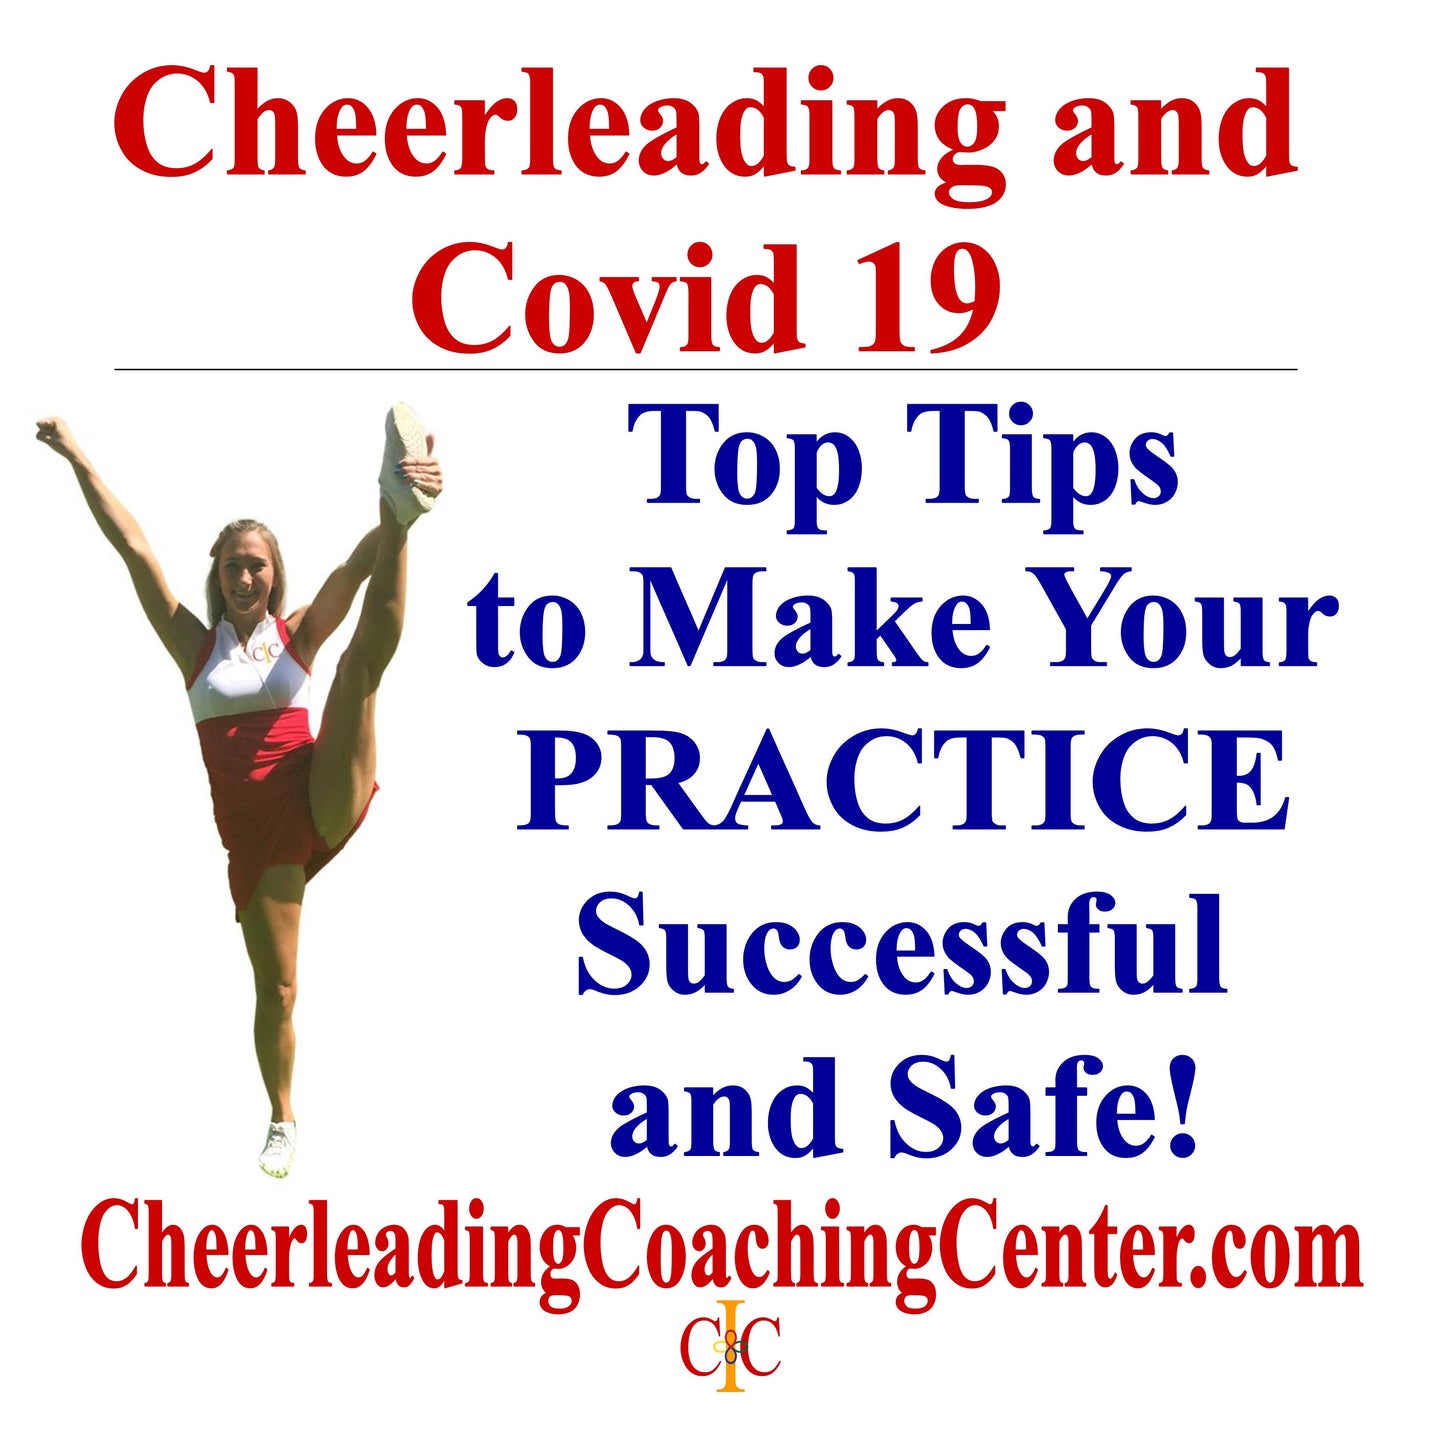 Cheerleading and Covid 19 TOP TIPS to Making Your Practice Successful and Safe!